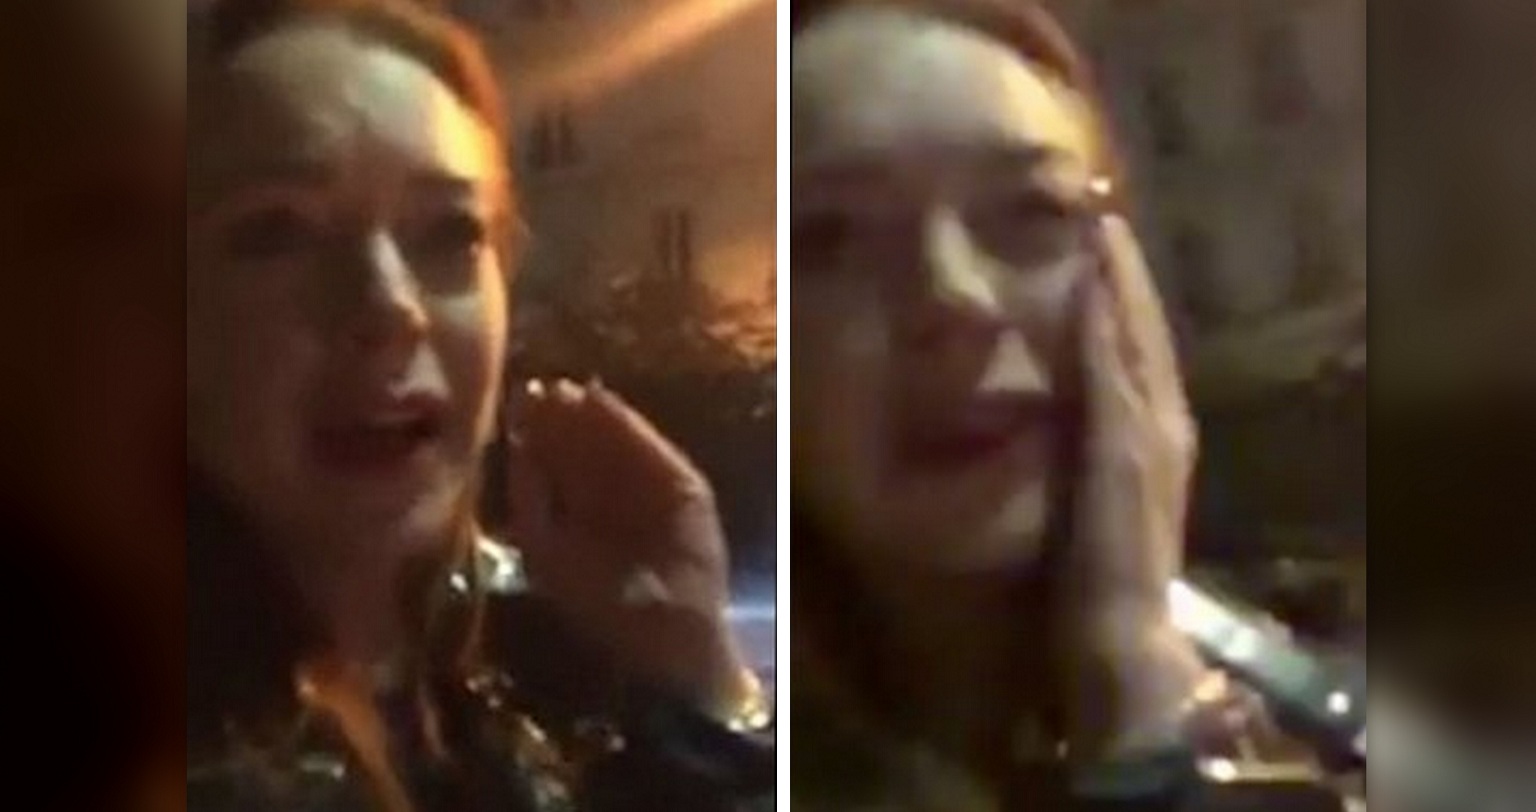 Lindsay Lohan Gets Punched In the Face After Accusing Parents of Child-Trafficking